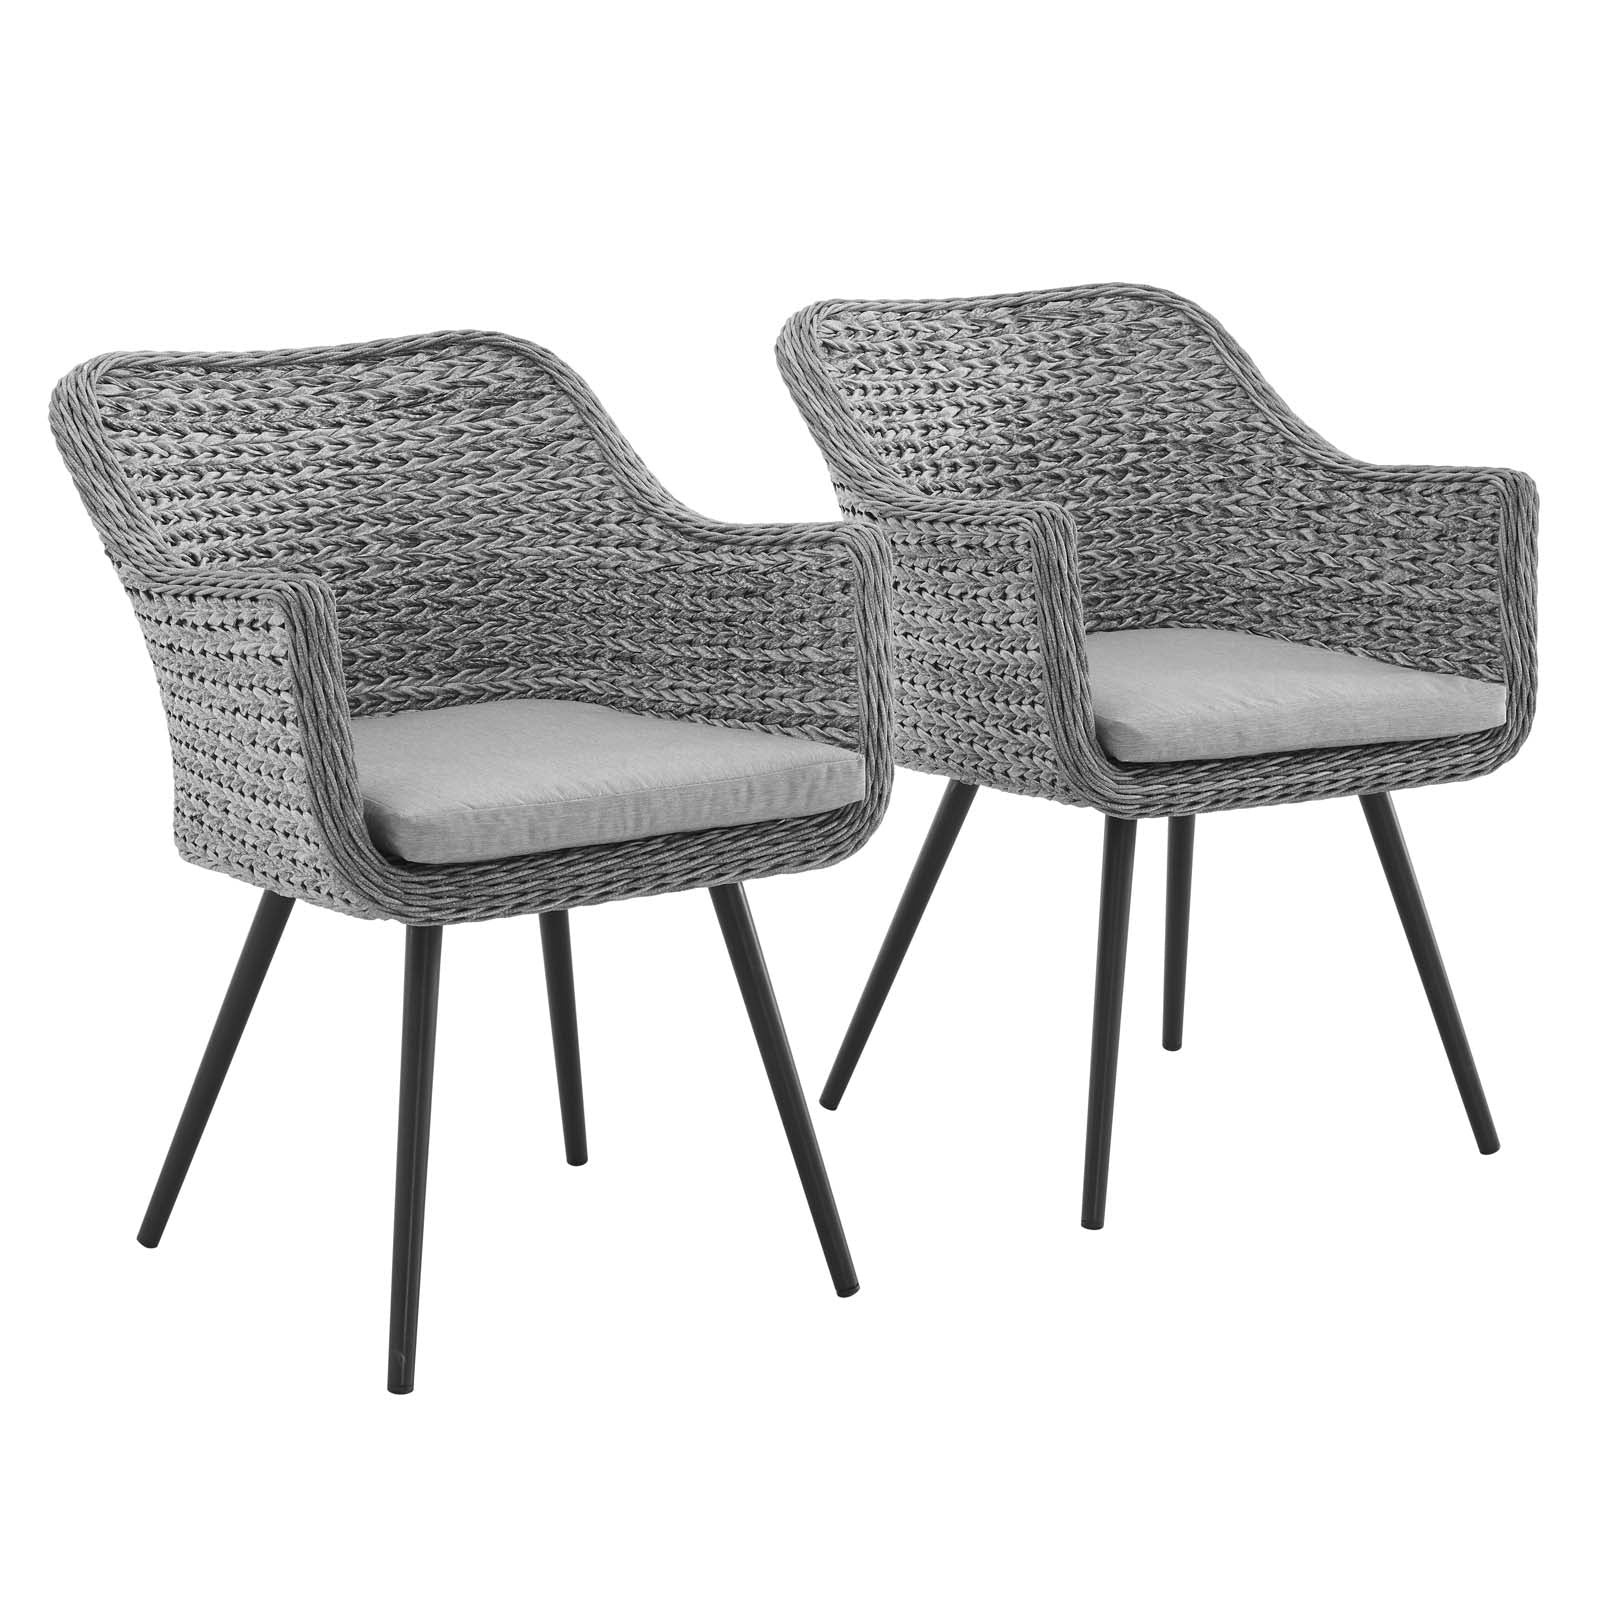 Endeavor Dining Armchair Outdoor Patio Wicker Rattan Set of 2-Outdoor Set-Modway-Wall2Wall Furnishings